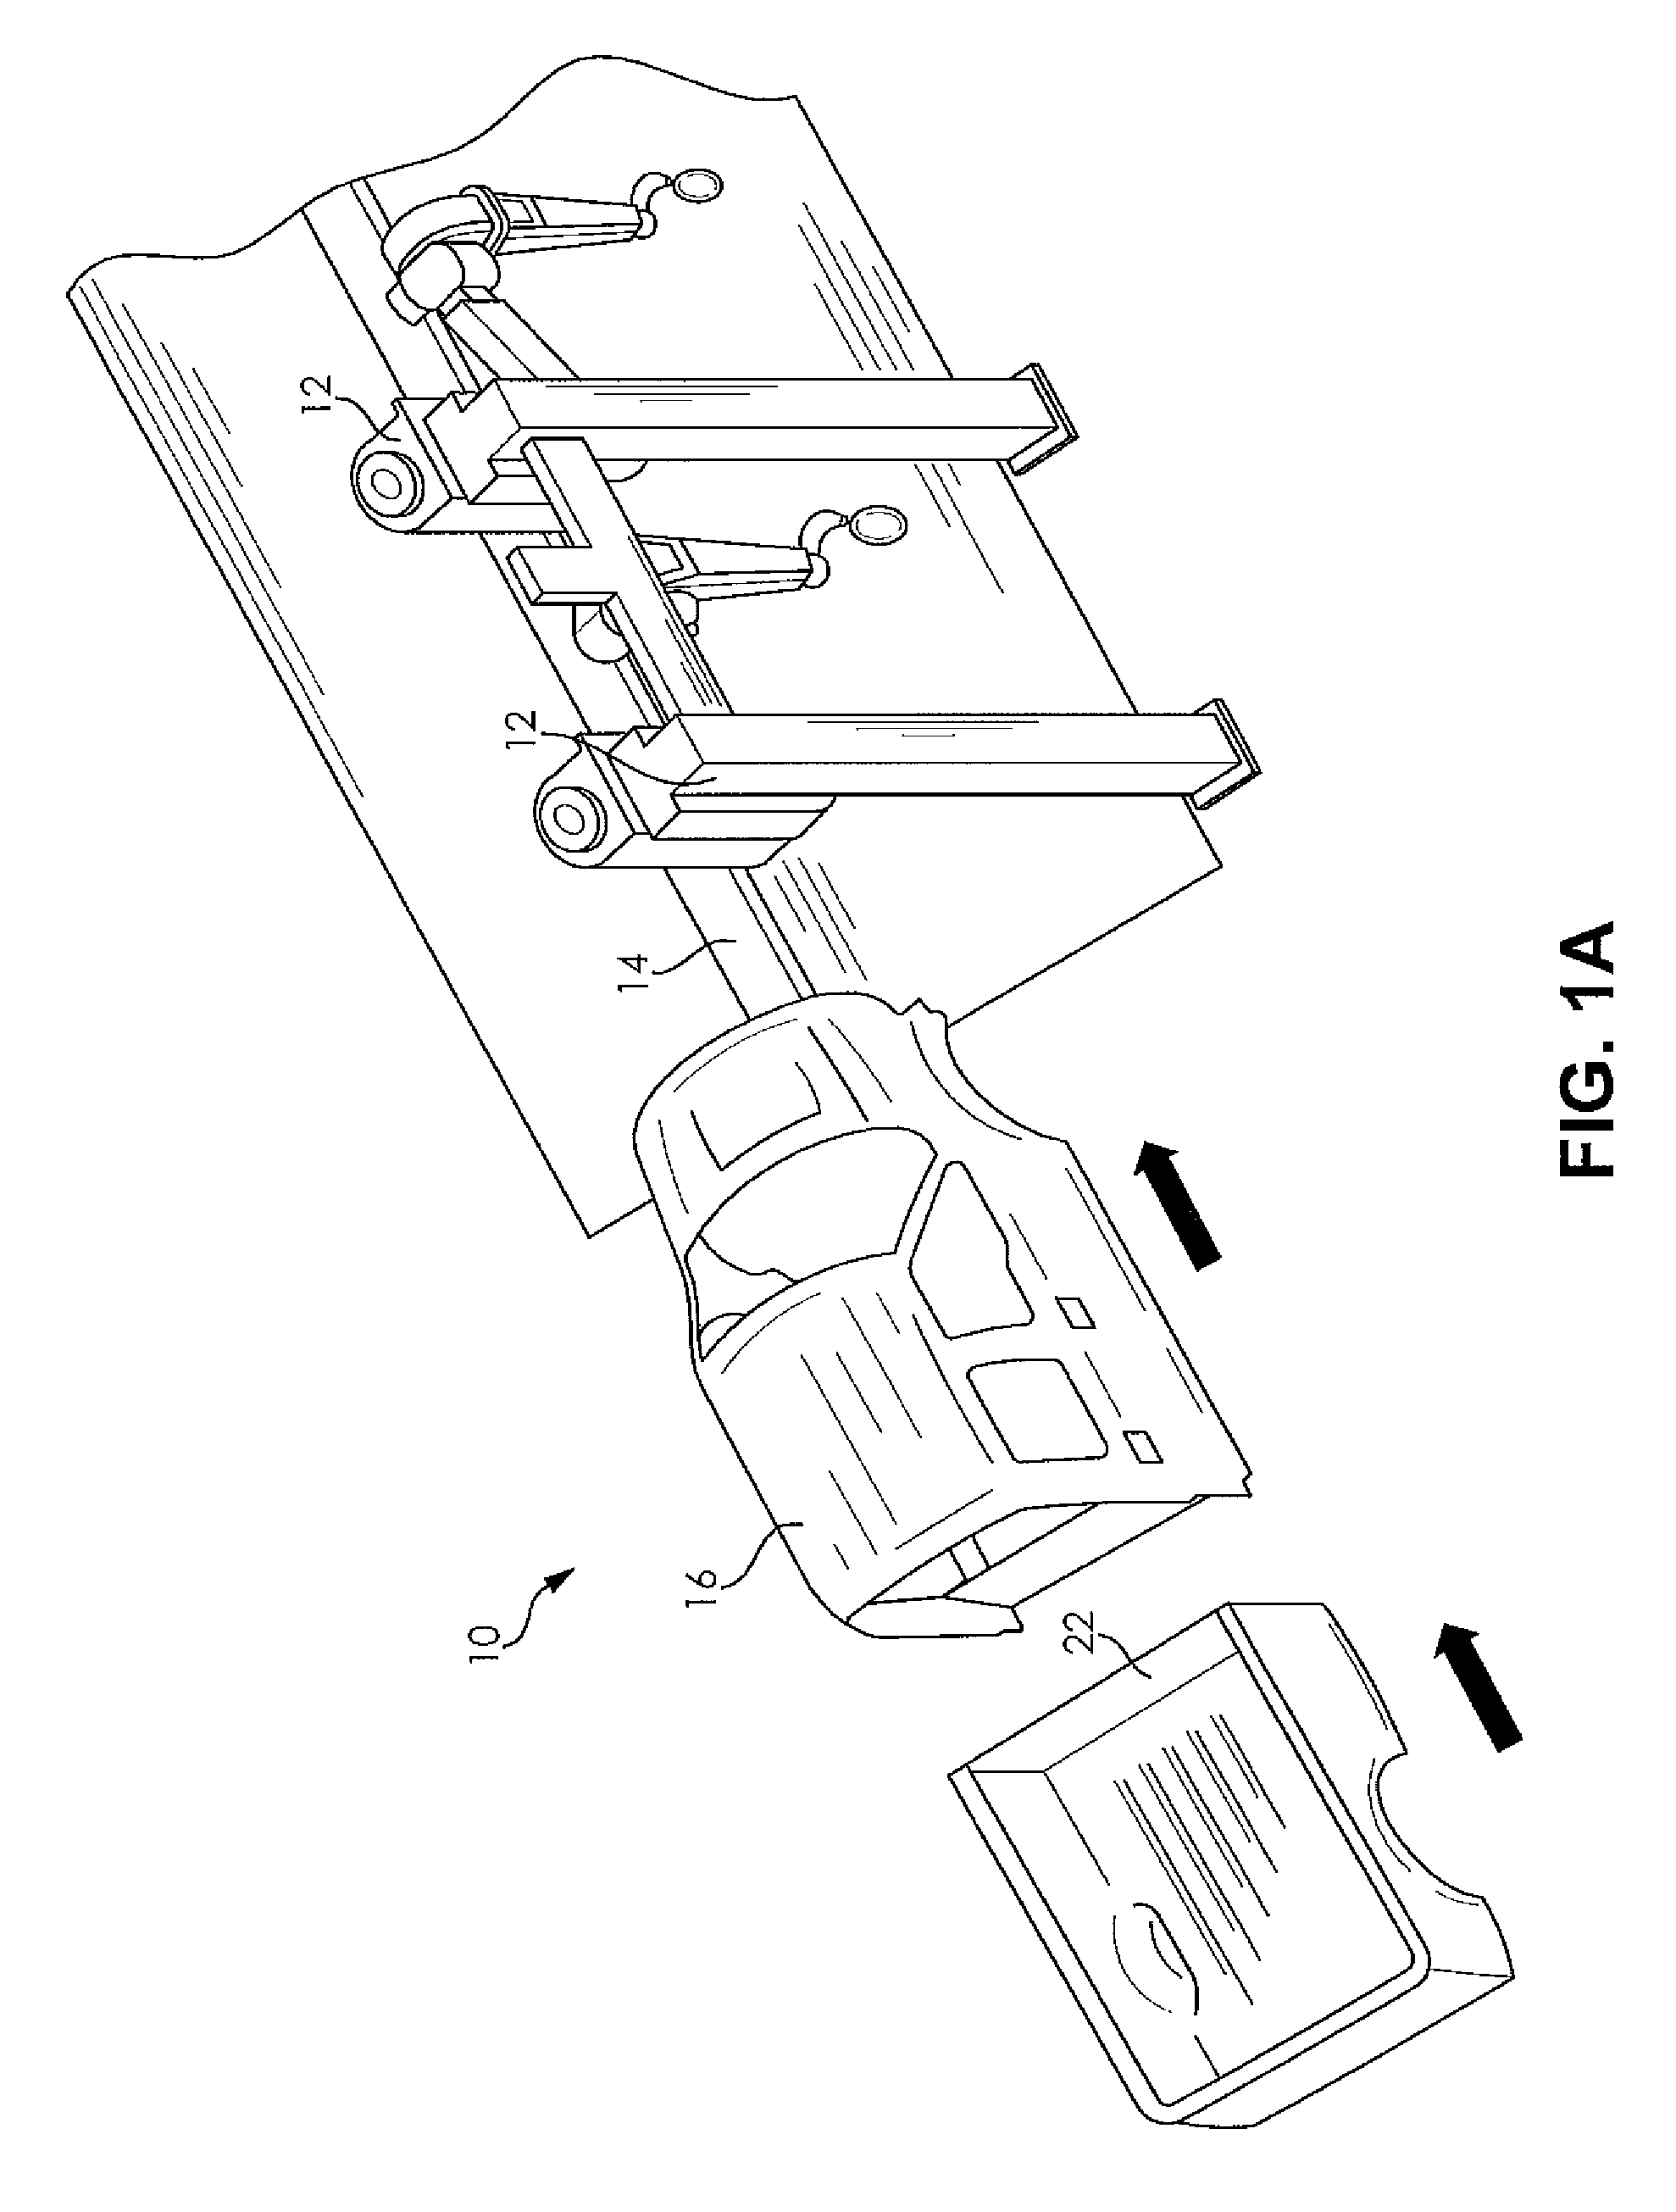 System and method for enhancing a visualization of coordinate points within a robots working envelope